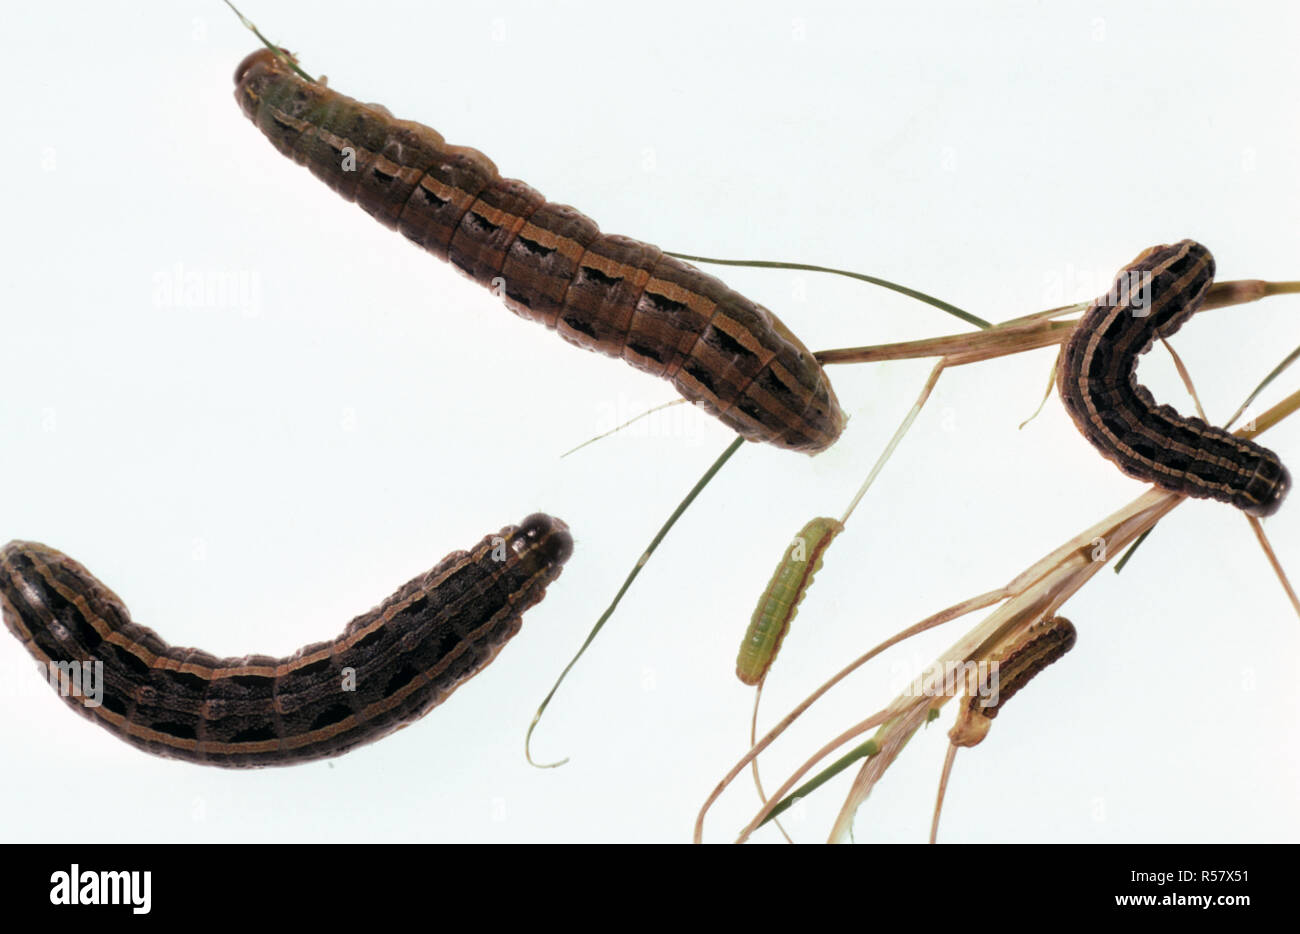 LAWN ARMY WORMS (Spodoptera mauritia) FEED ON VARIOUS GRASSES AND ARE CONSIDERED A MAJOR AGRICULTURAL PLANT PEST Stock Photo